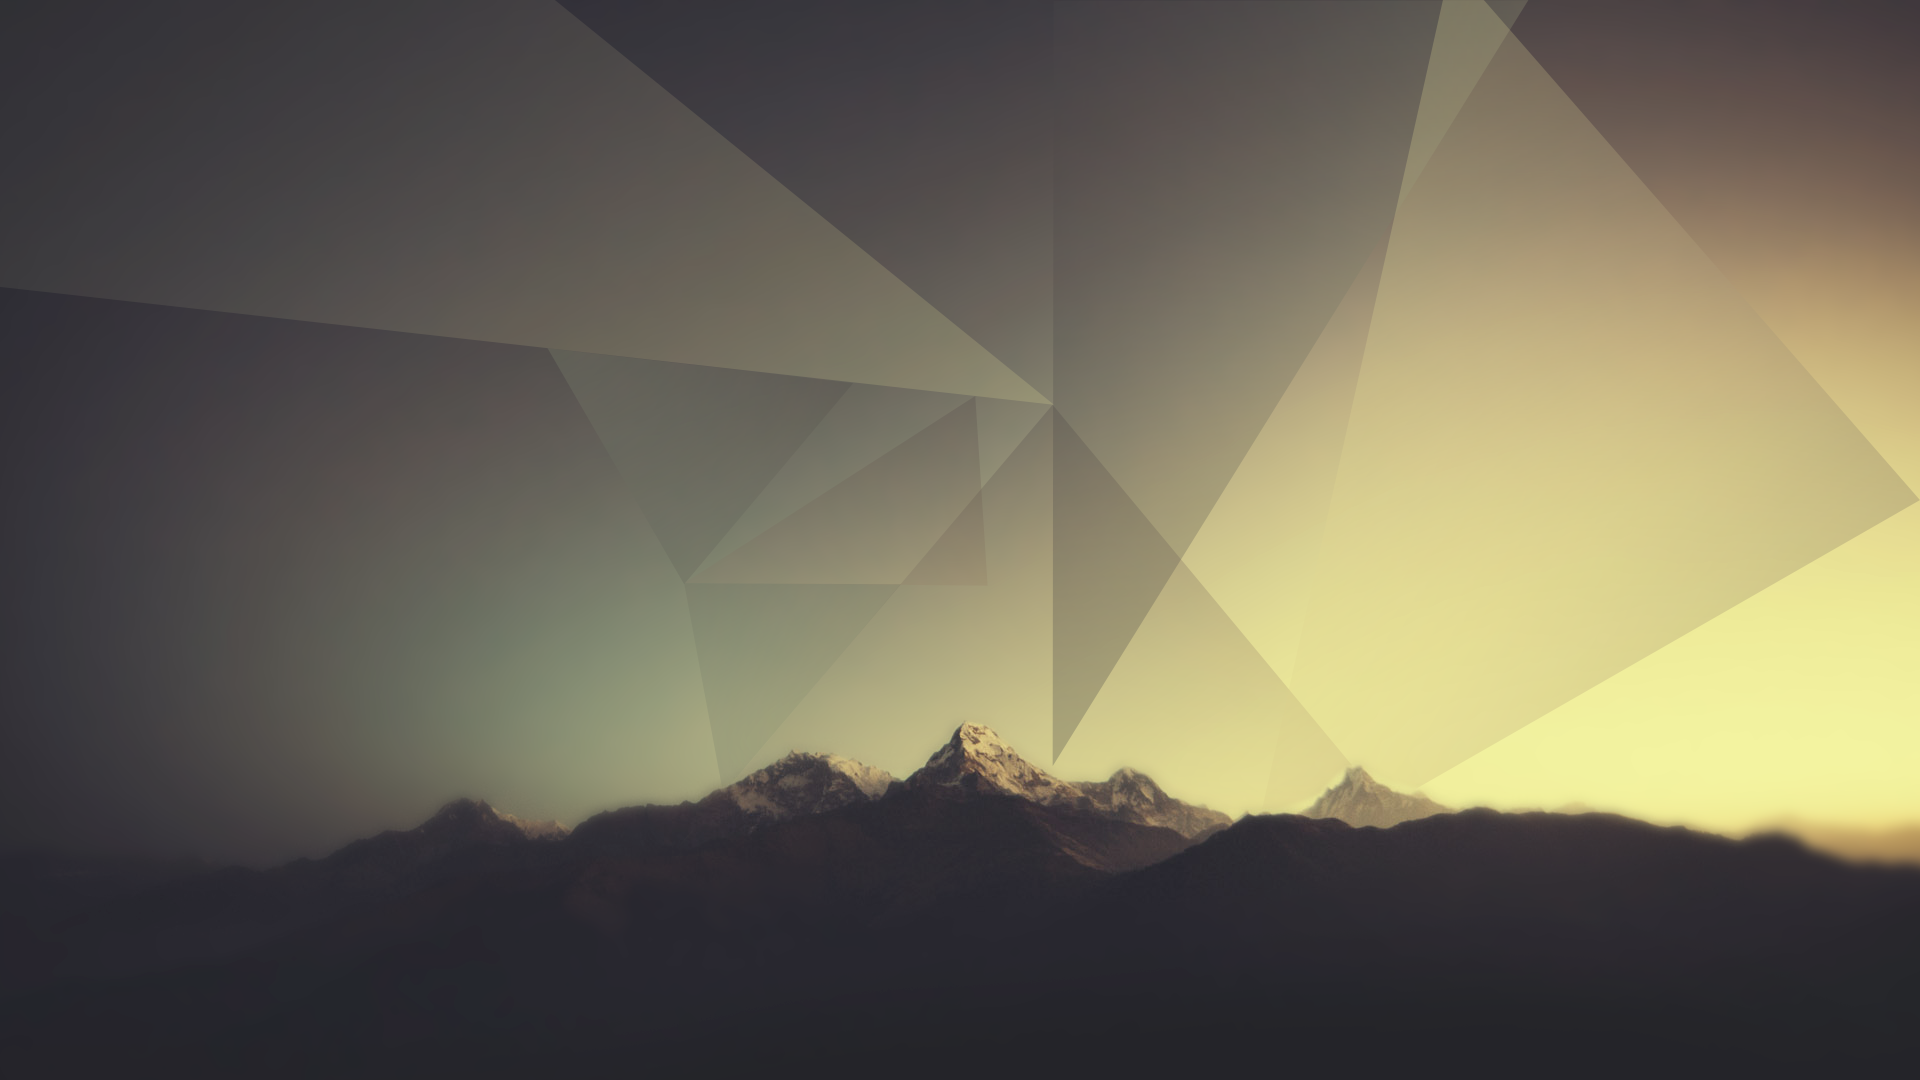 General 1920x1080 digital art mountains abstract landscape nature